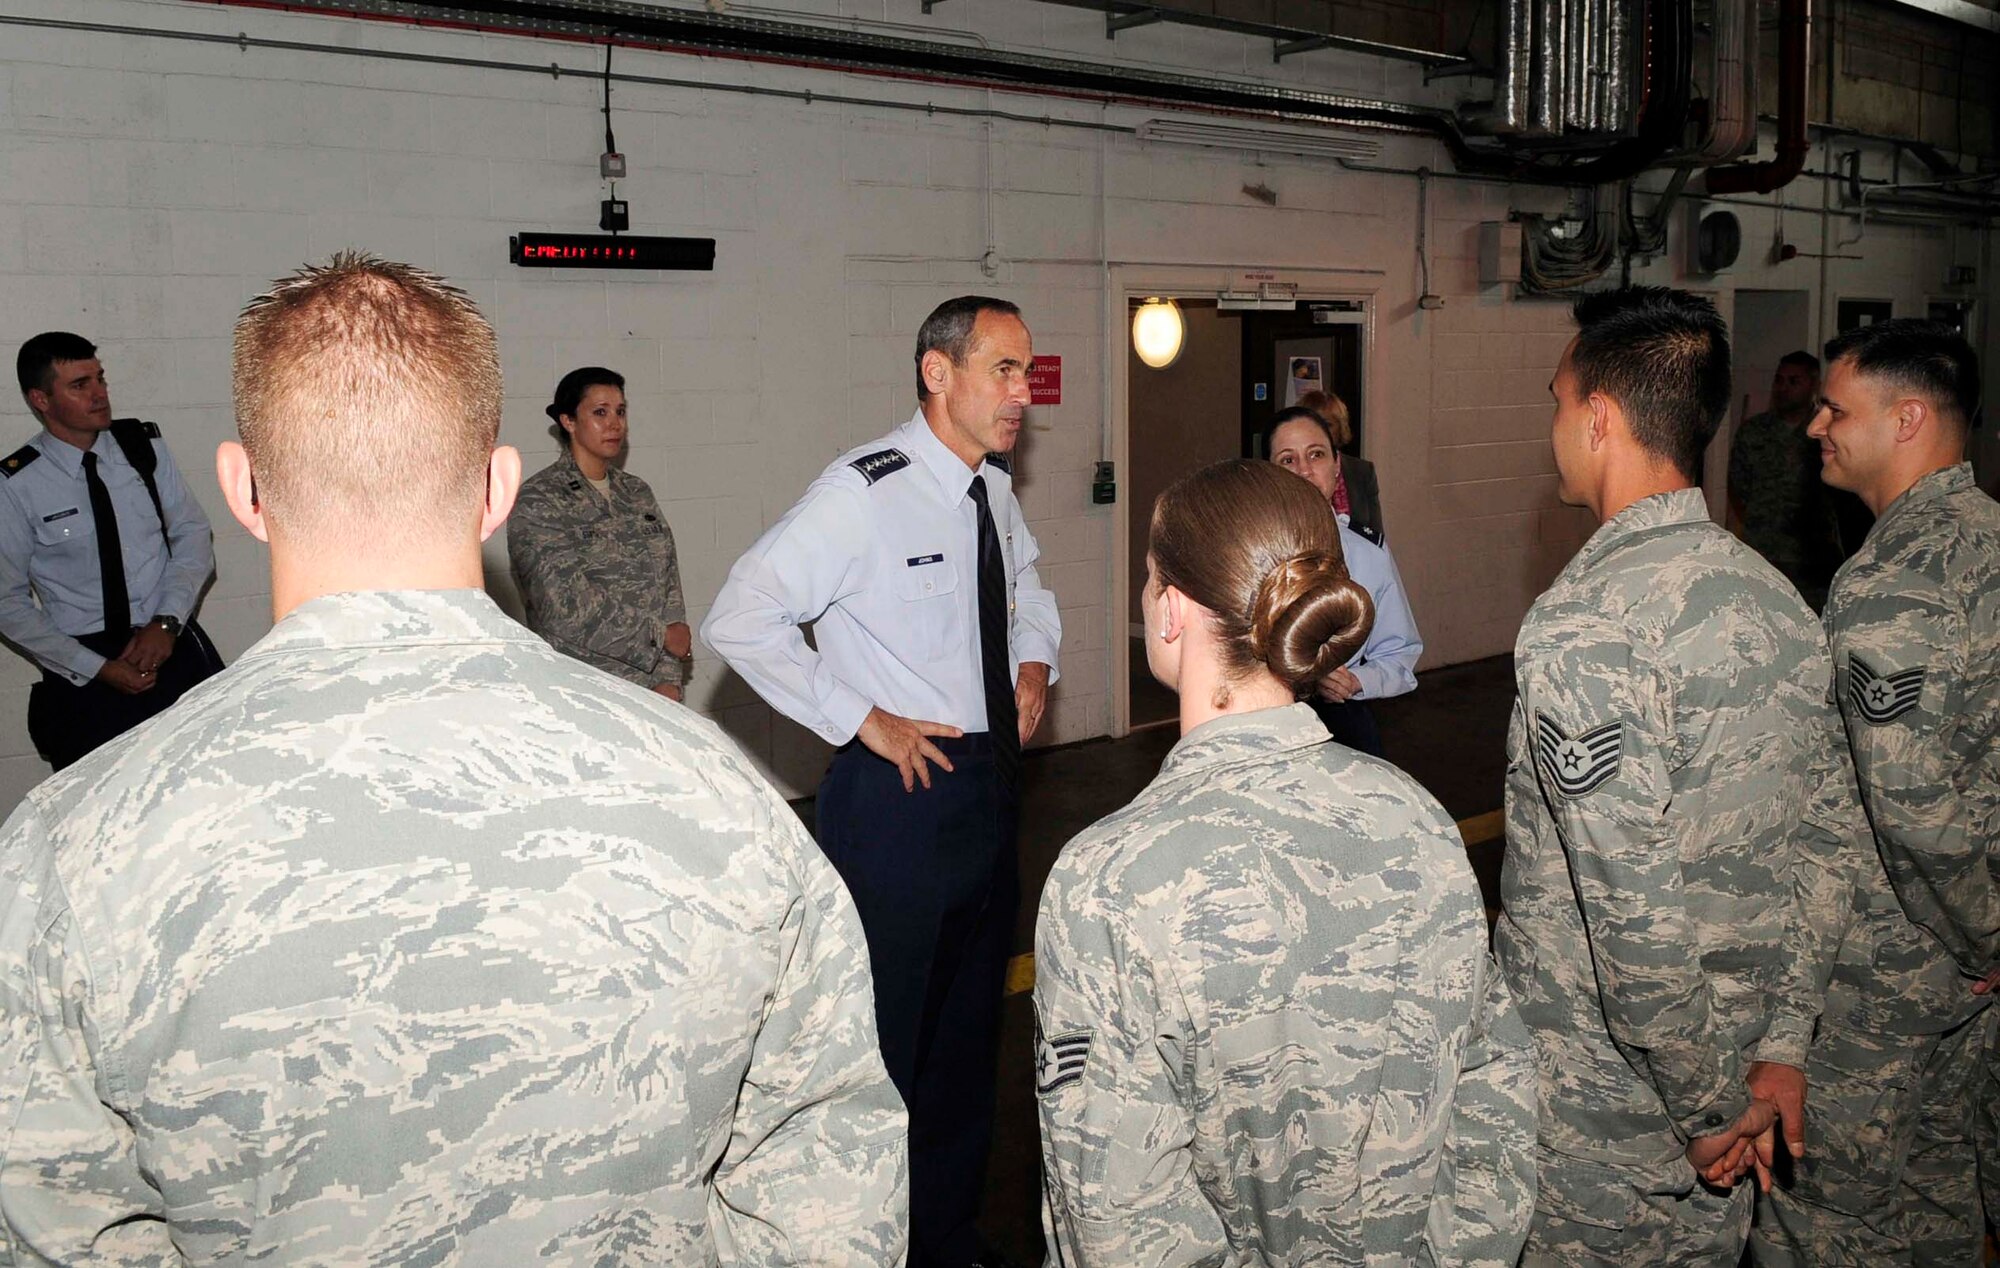 RAF MILDENHALL, England – Gen. Raymond Johns, Air Mobility Command commander, meets Airmen from the 727th Air Mobility Squadron during a site visit here, July 5, 2012. The 727th AMS is a tenant unit based out of RAF Mildenhall. (U.S. Air Force photo/Senior Airman Ethan Morgan)